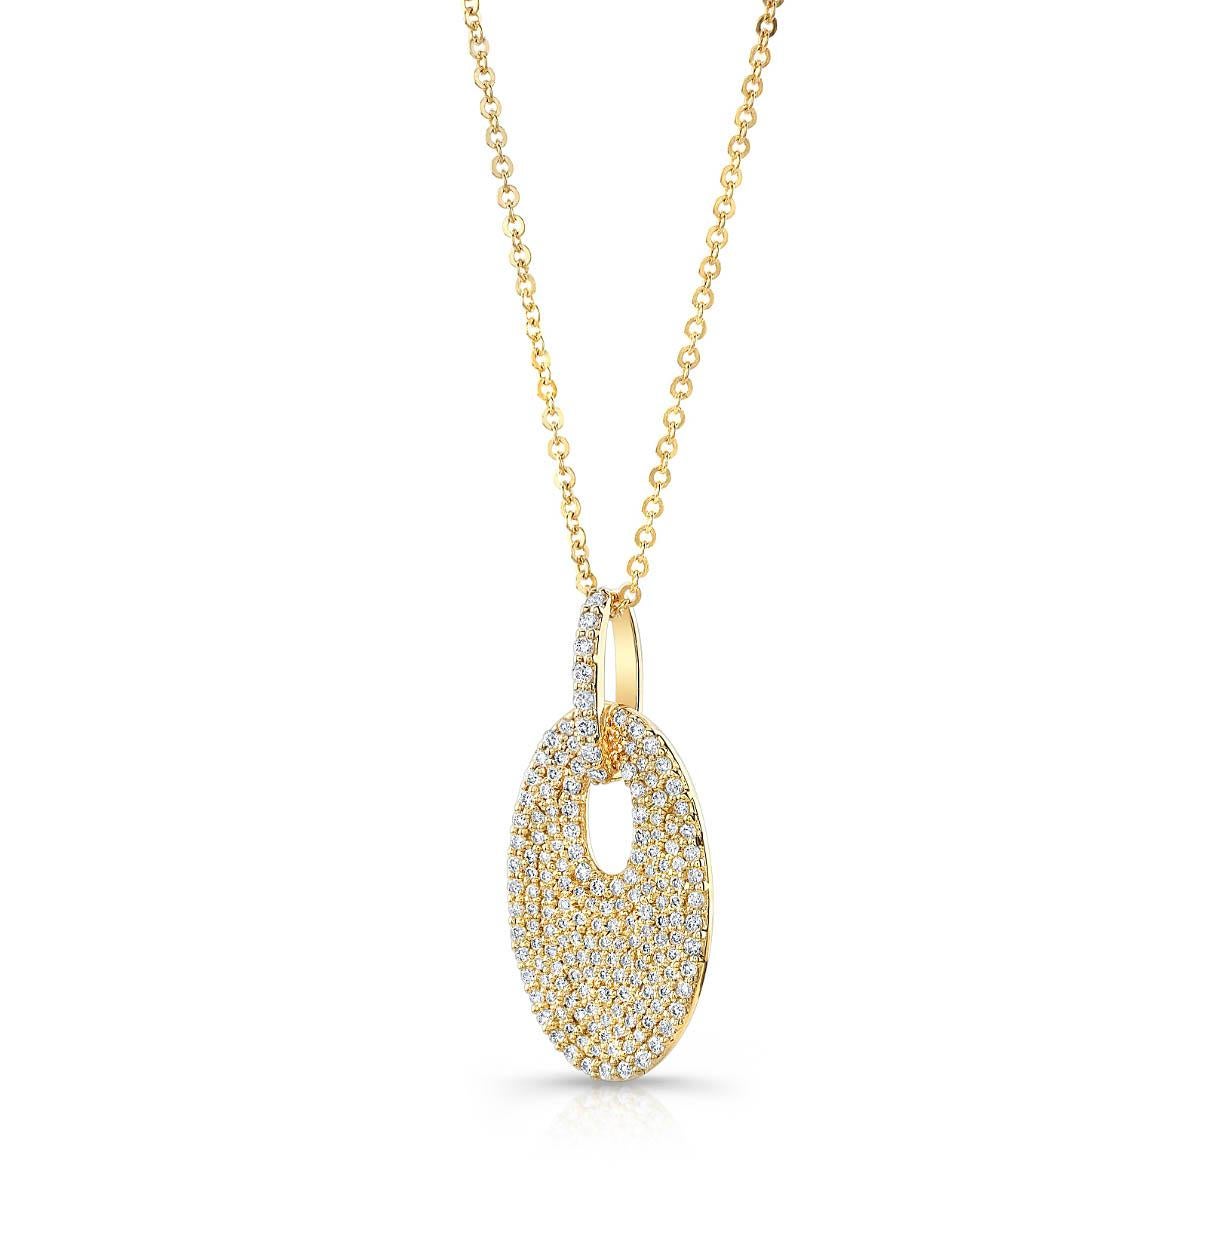 Introducing our elegant 14 karat yellow gold diamond pave oval disc pendant. This necklace features an oval design adorned with 169 round brilliant cut diamonds weighing 0.60 carats, H/I Color, VS/SI clarity exuding a captivating and refined